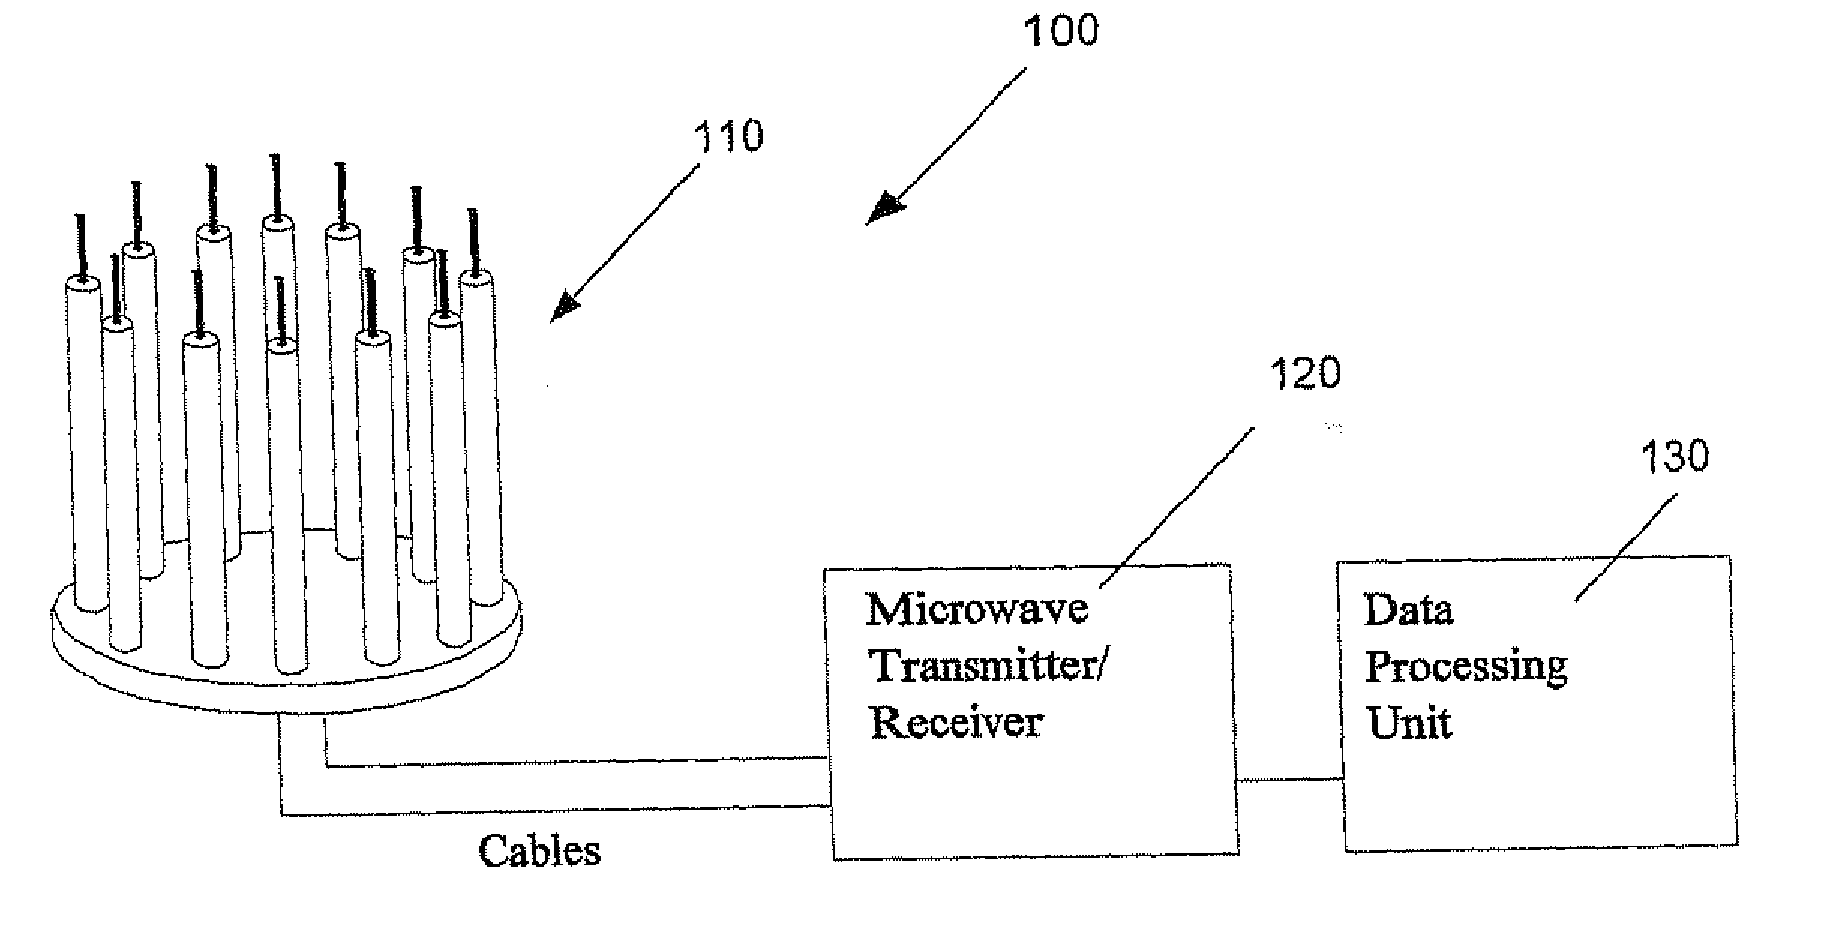 System and method relating to examination of an object